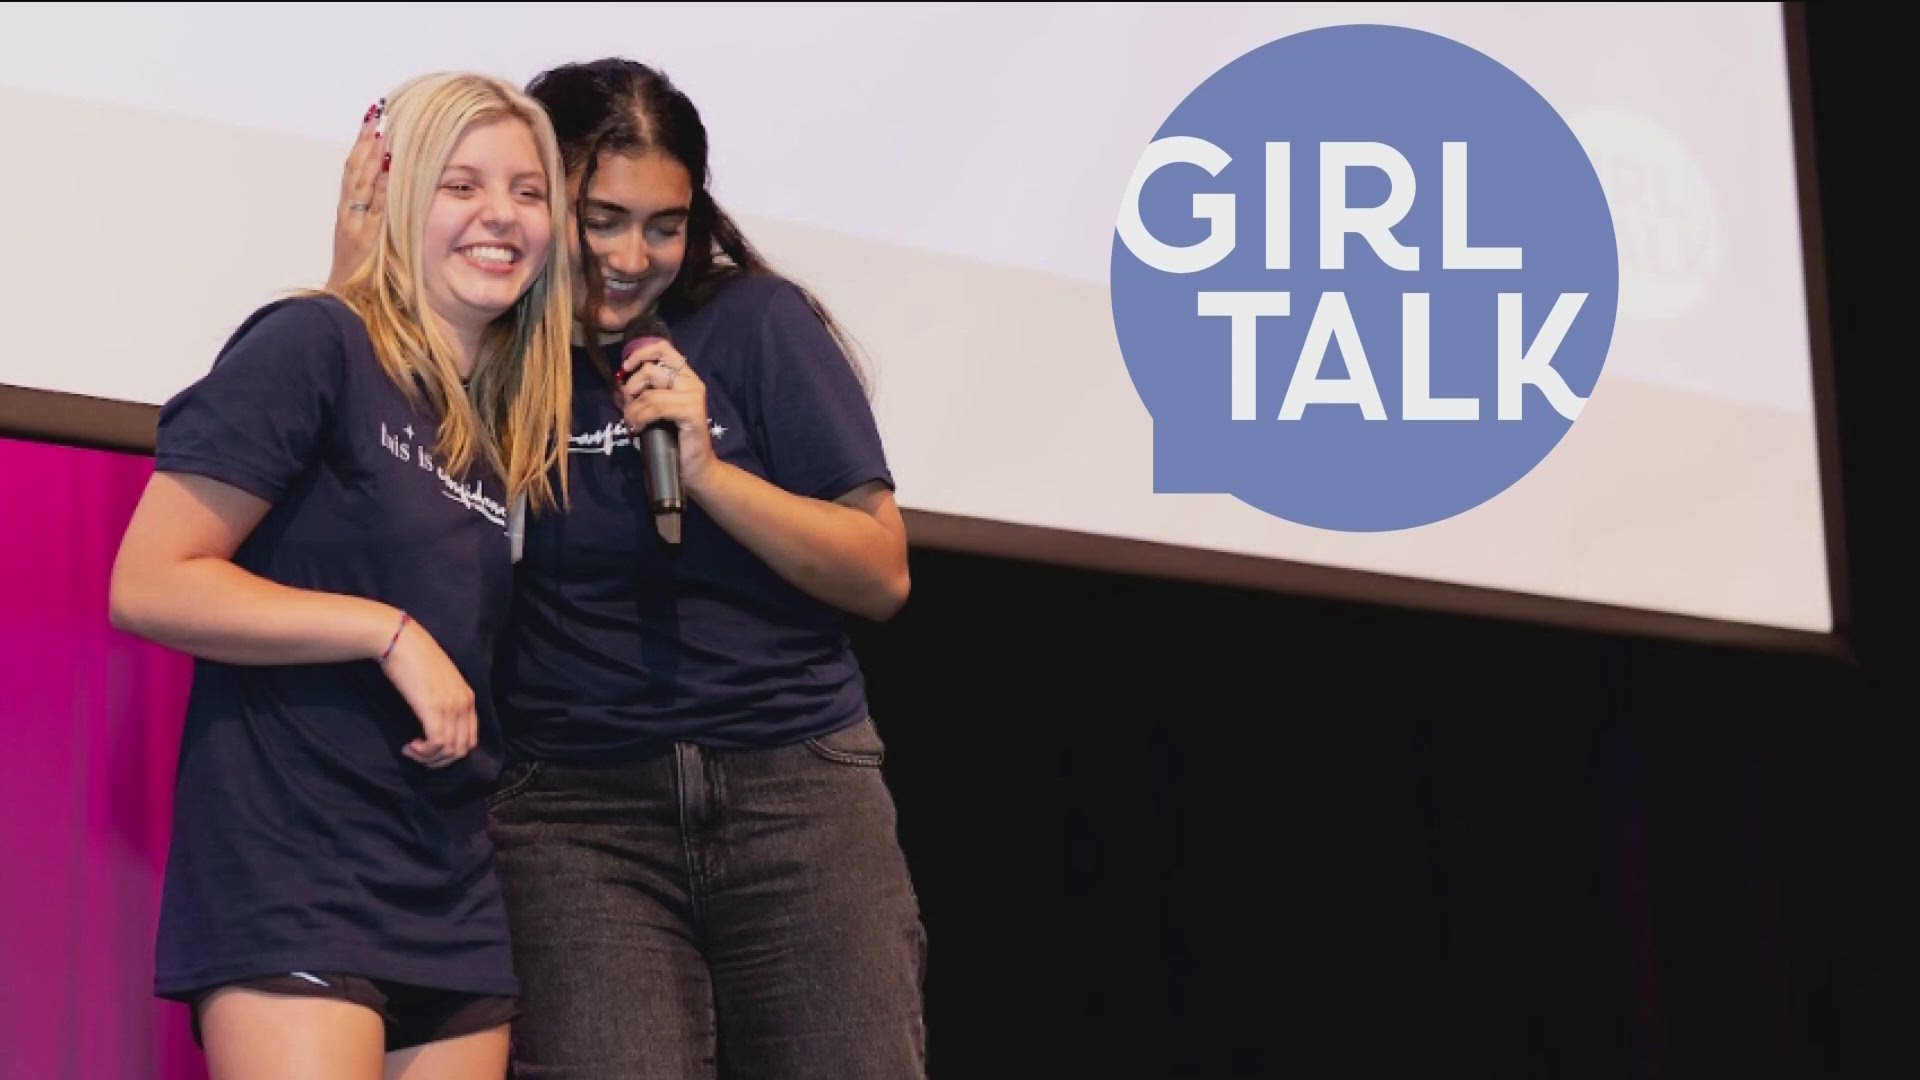 The nationwide club uses peer-to-peer mentoring to boost confidence and help middle school girls deal with bullying, social media, and stress.